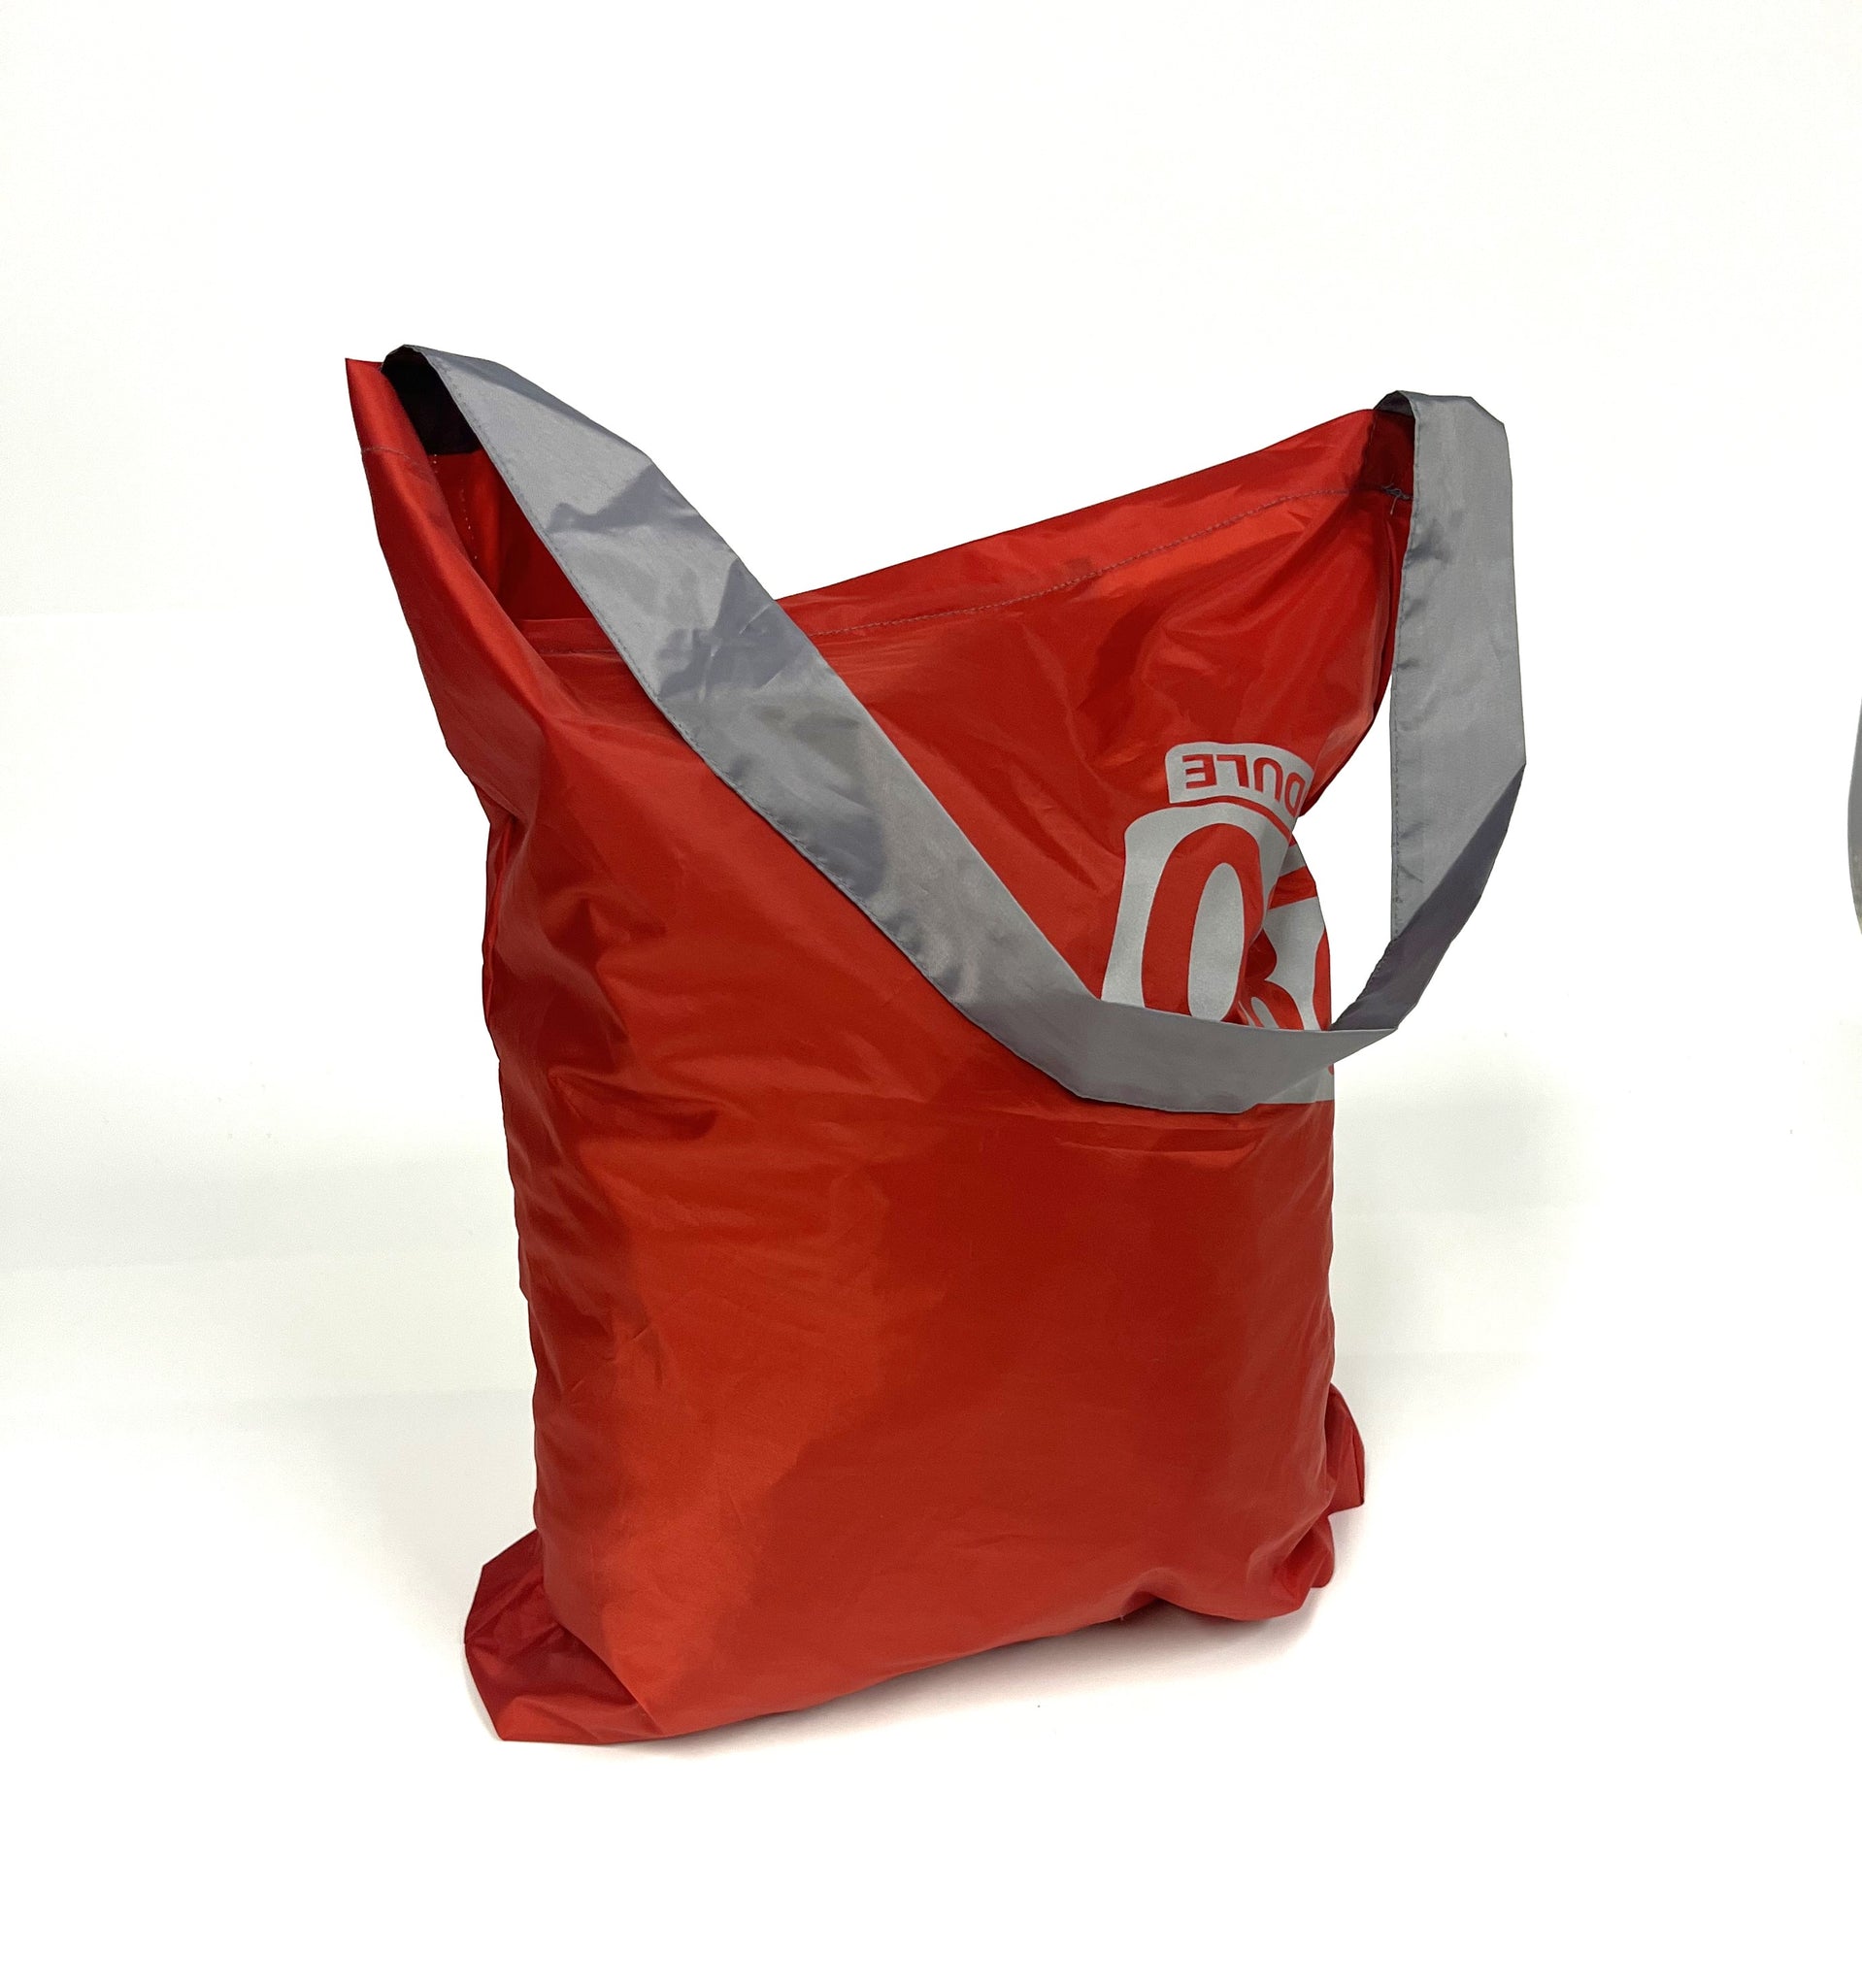 Red & Grey R4 Market Bag on a white background